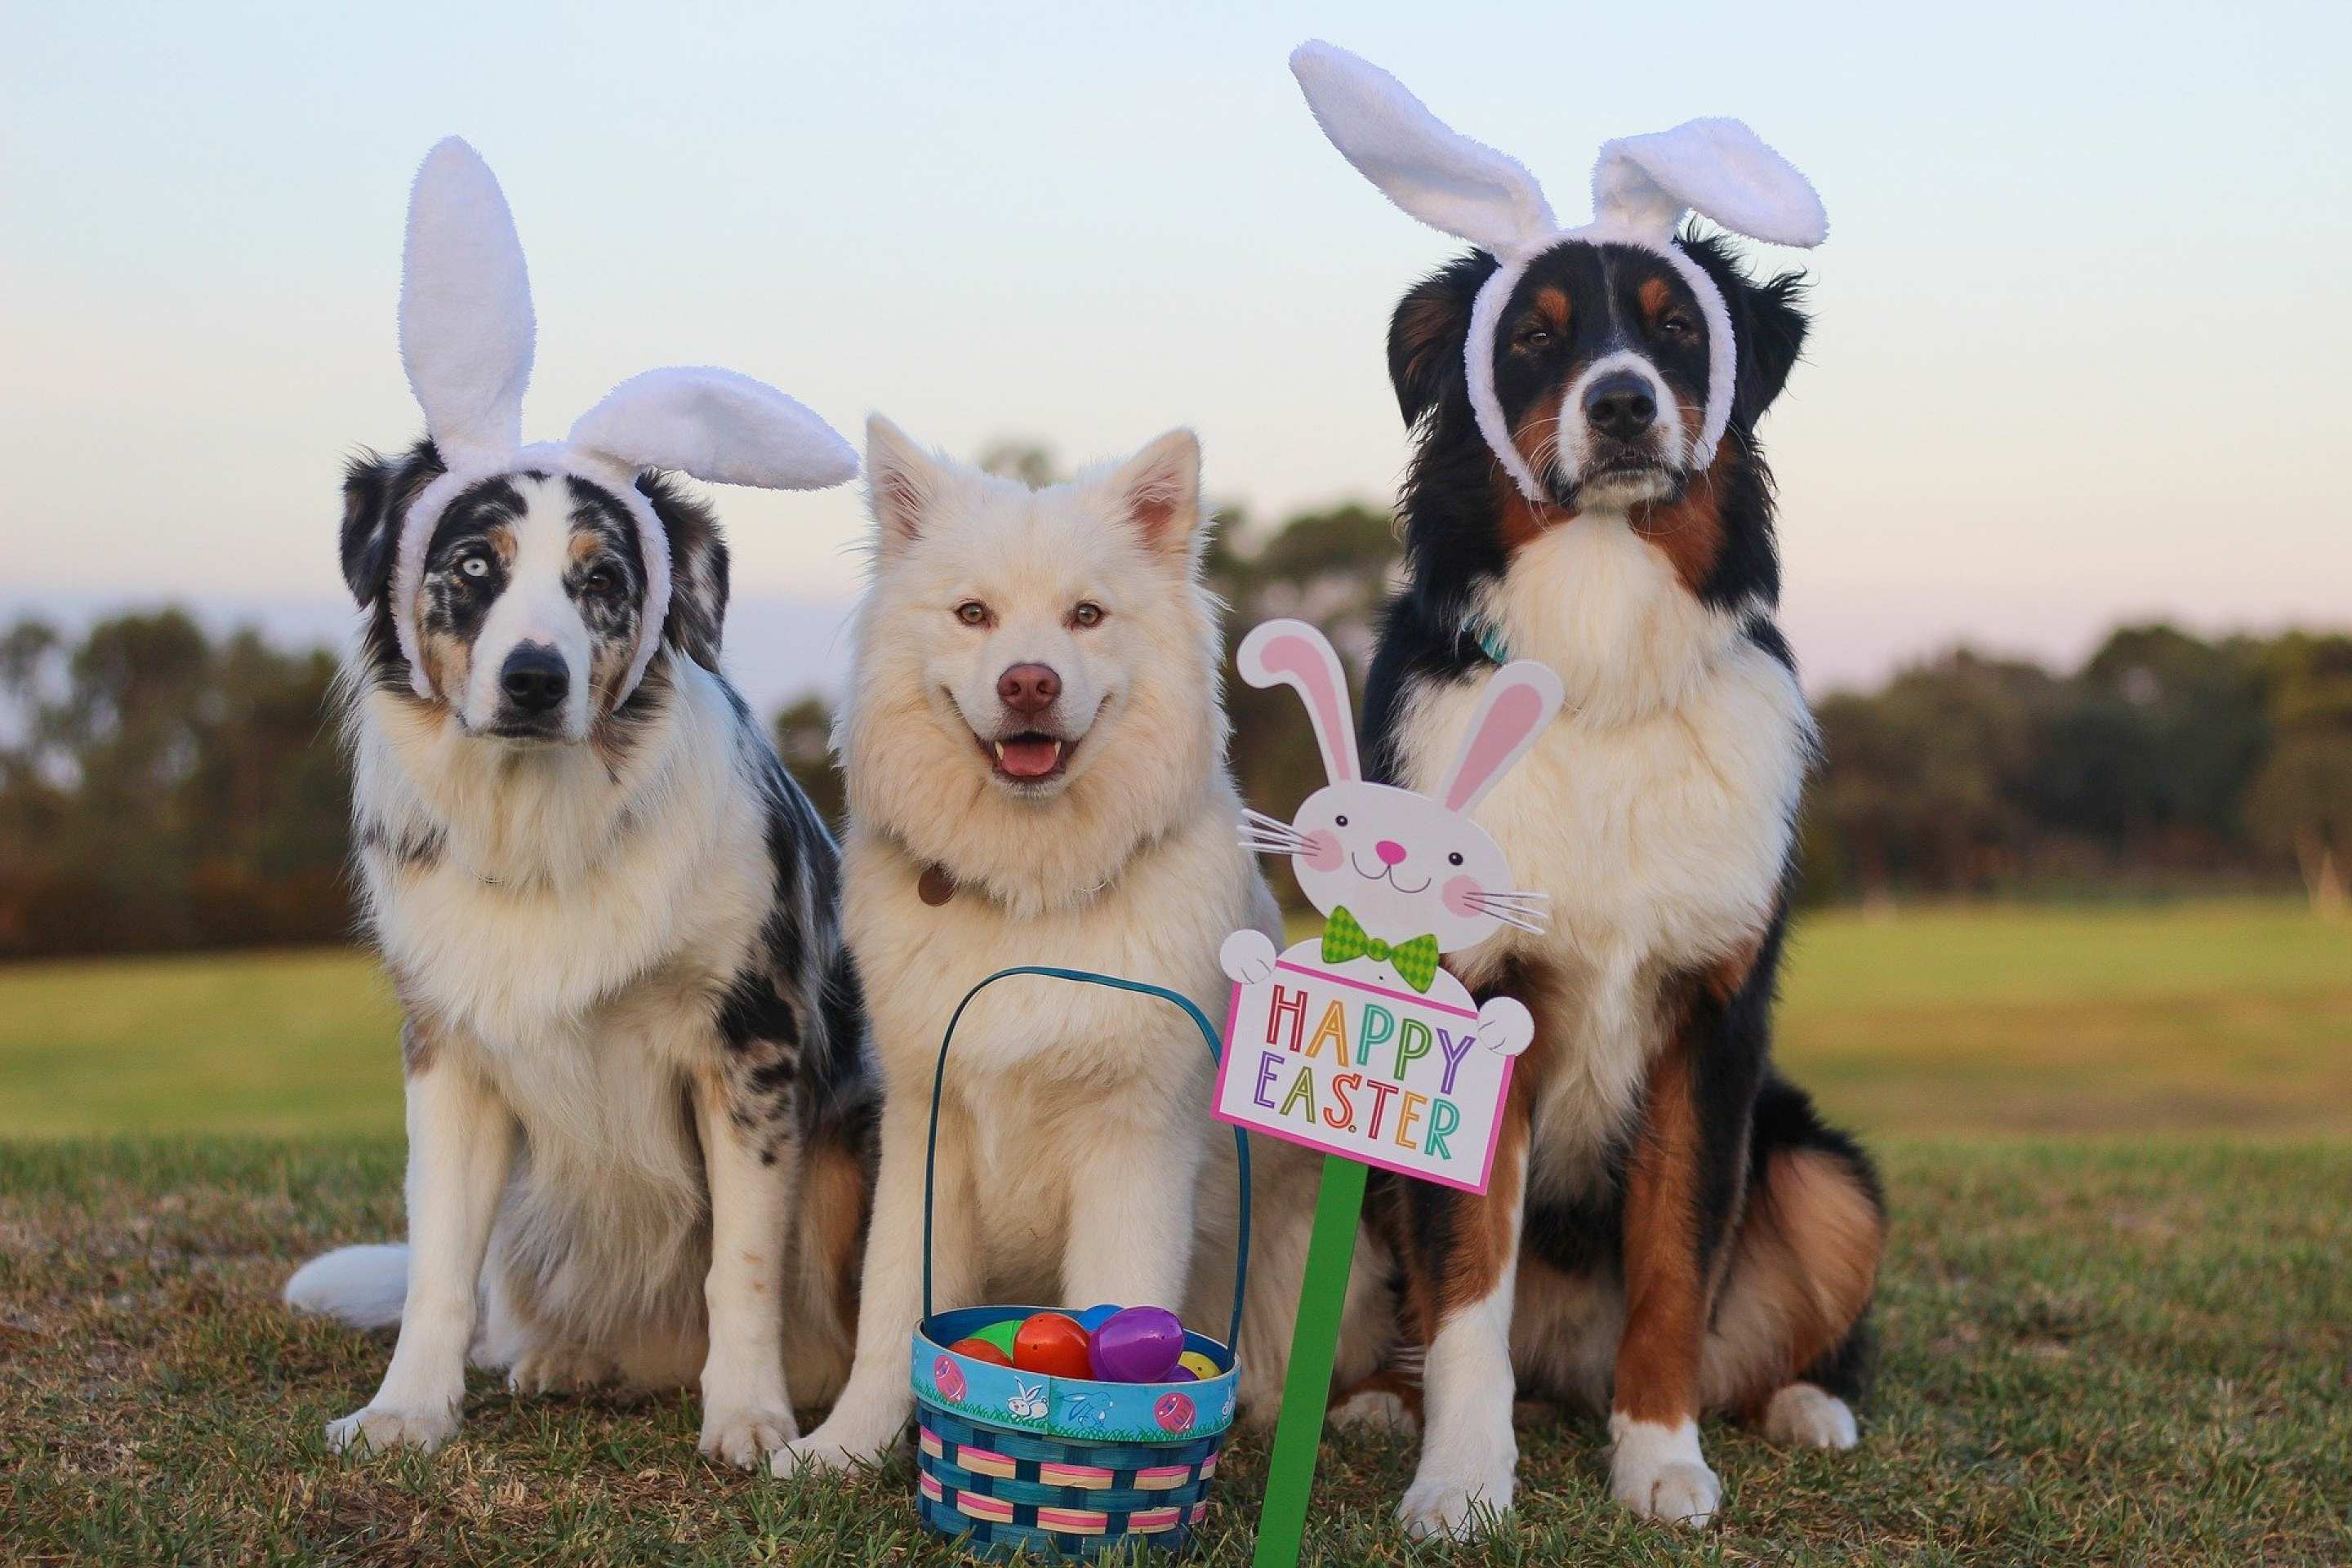 Easter chocolate toxic for dogs - The University of Sydney